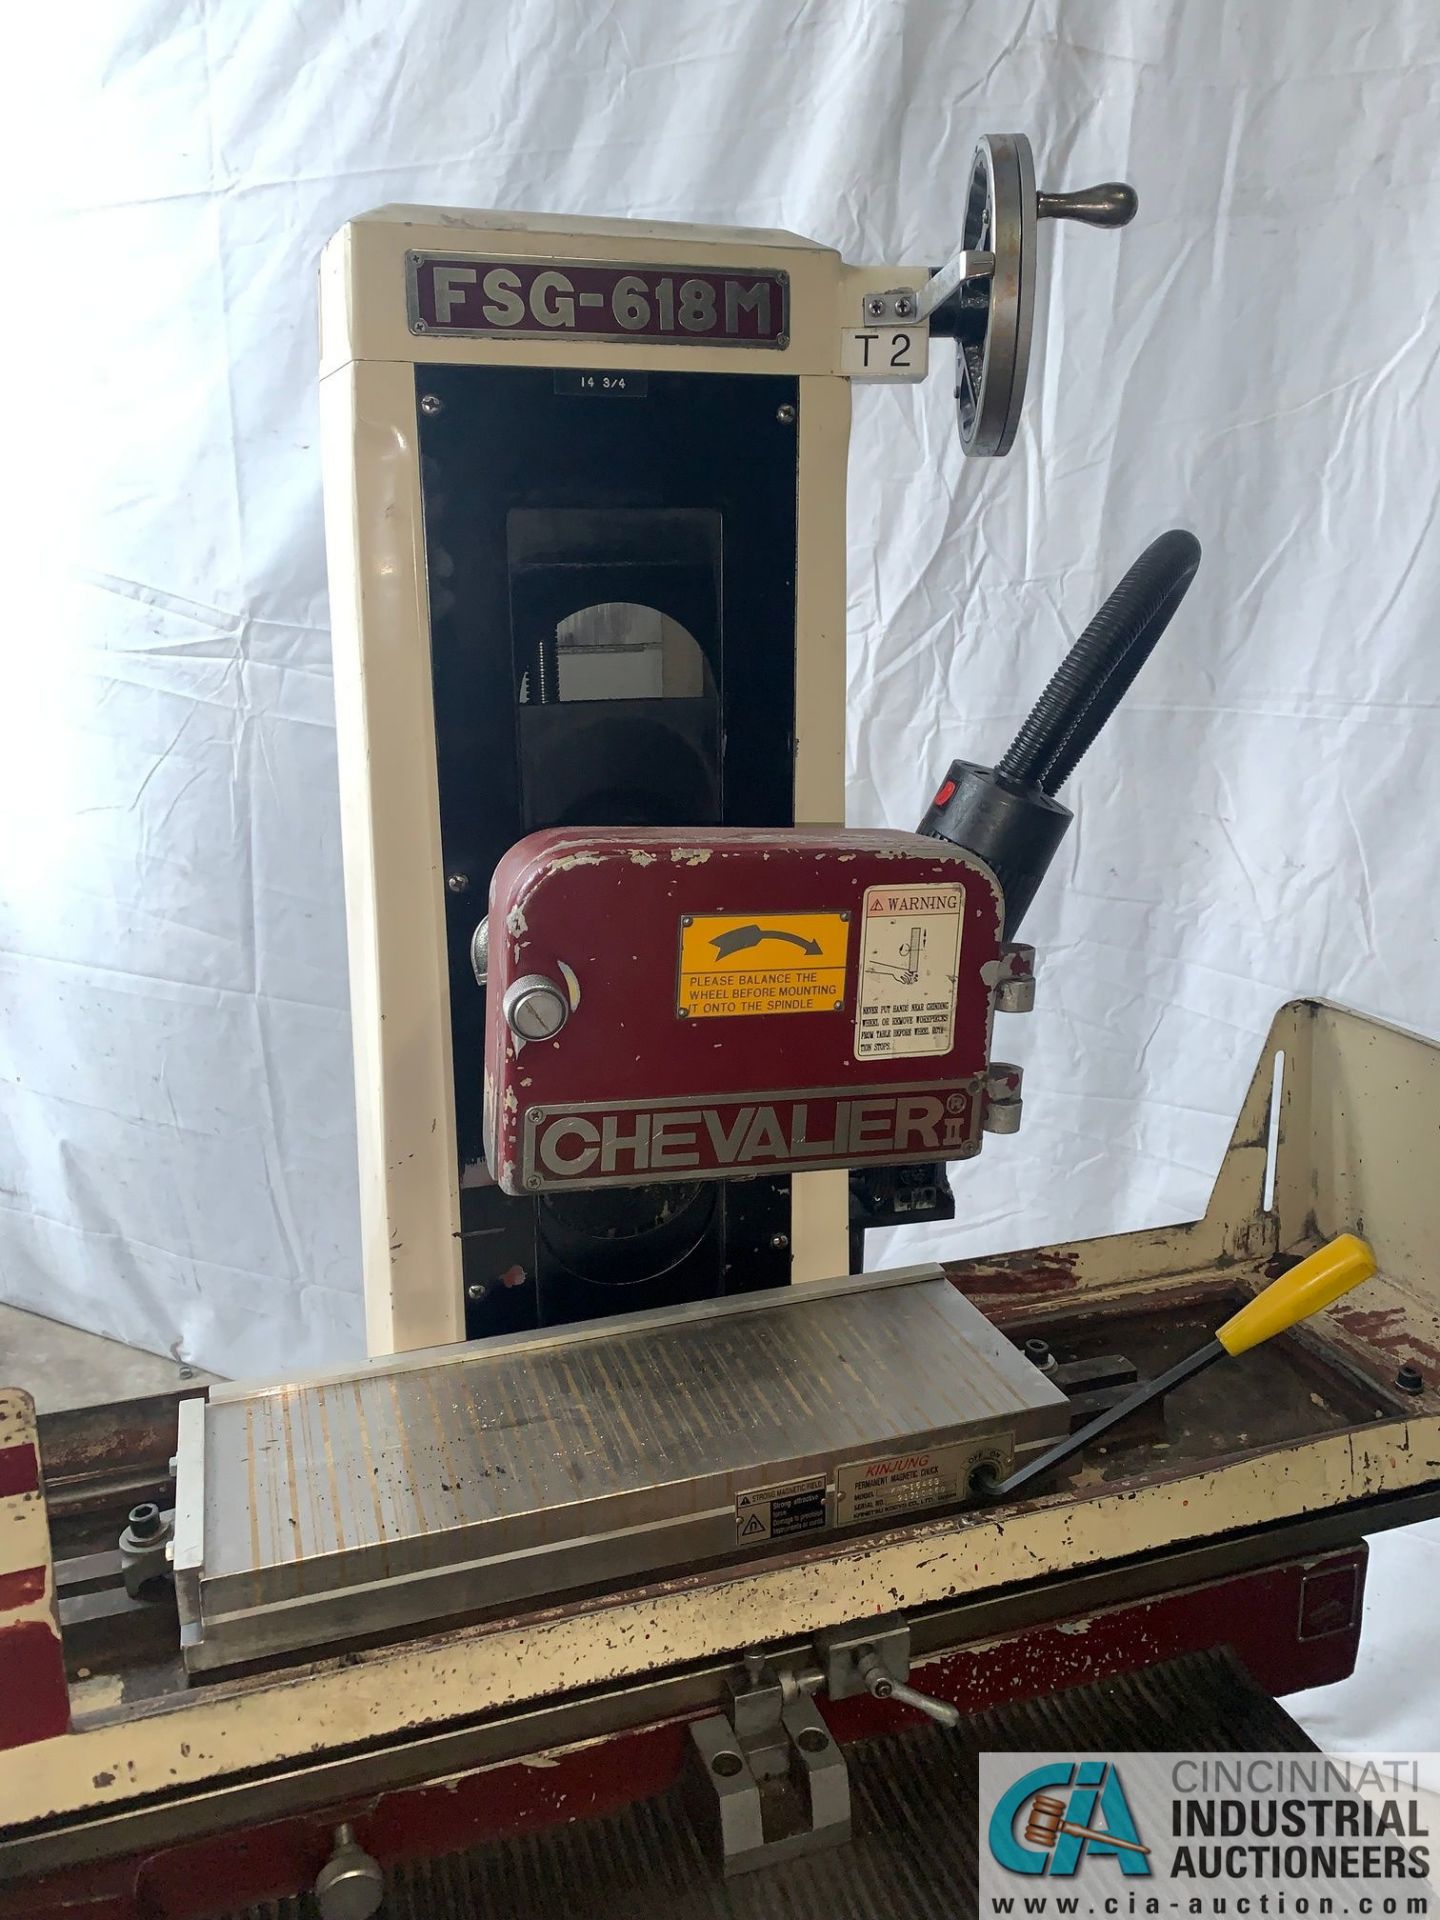 6" X 18" CHEVALIER FSG-618M HAND FEED BALL SCREW TABLE SURFACE GRINDER **LOCATED AT 1400 OAK ST., - Image 2 of 4